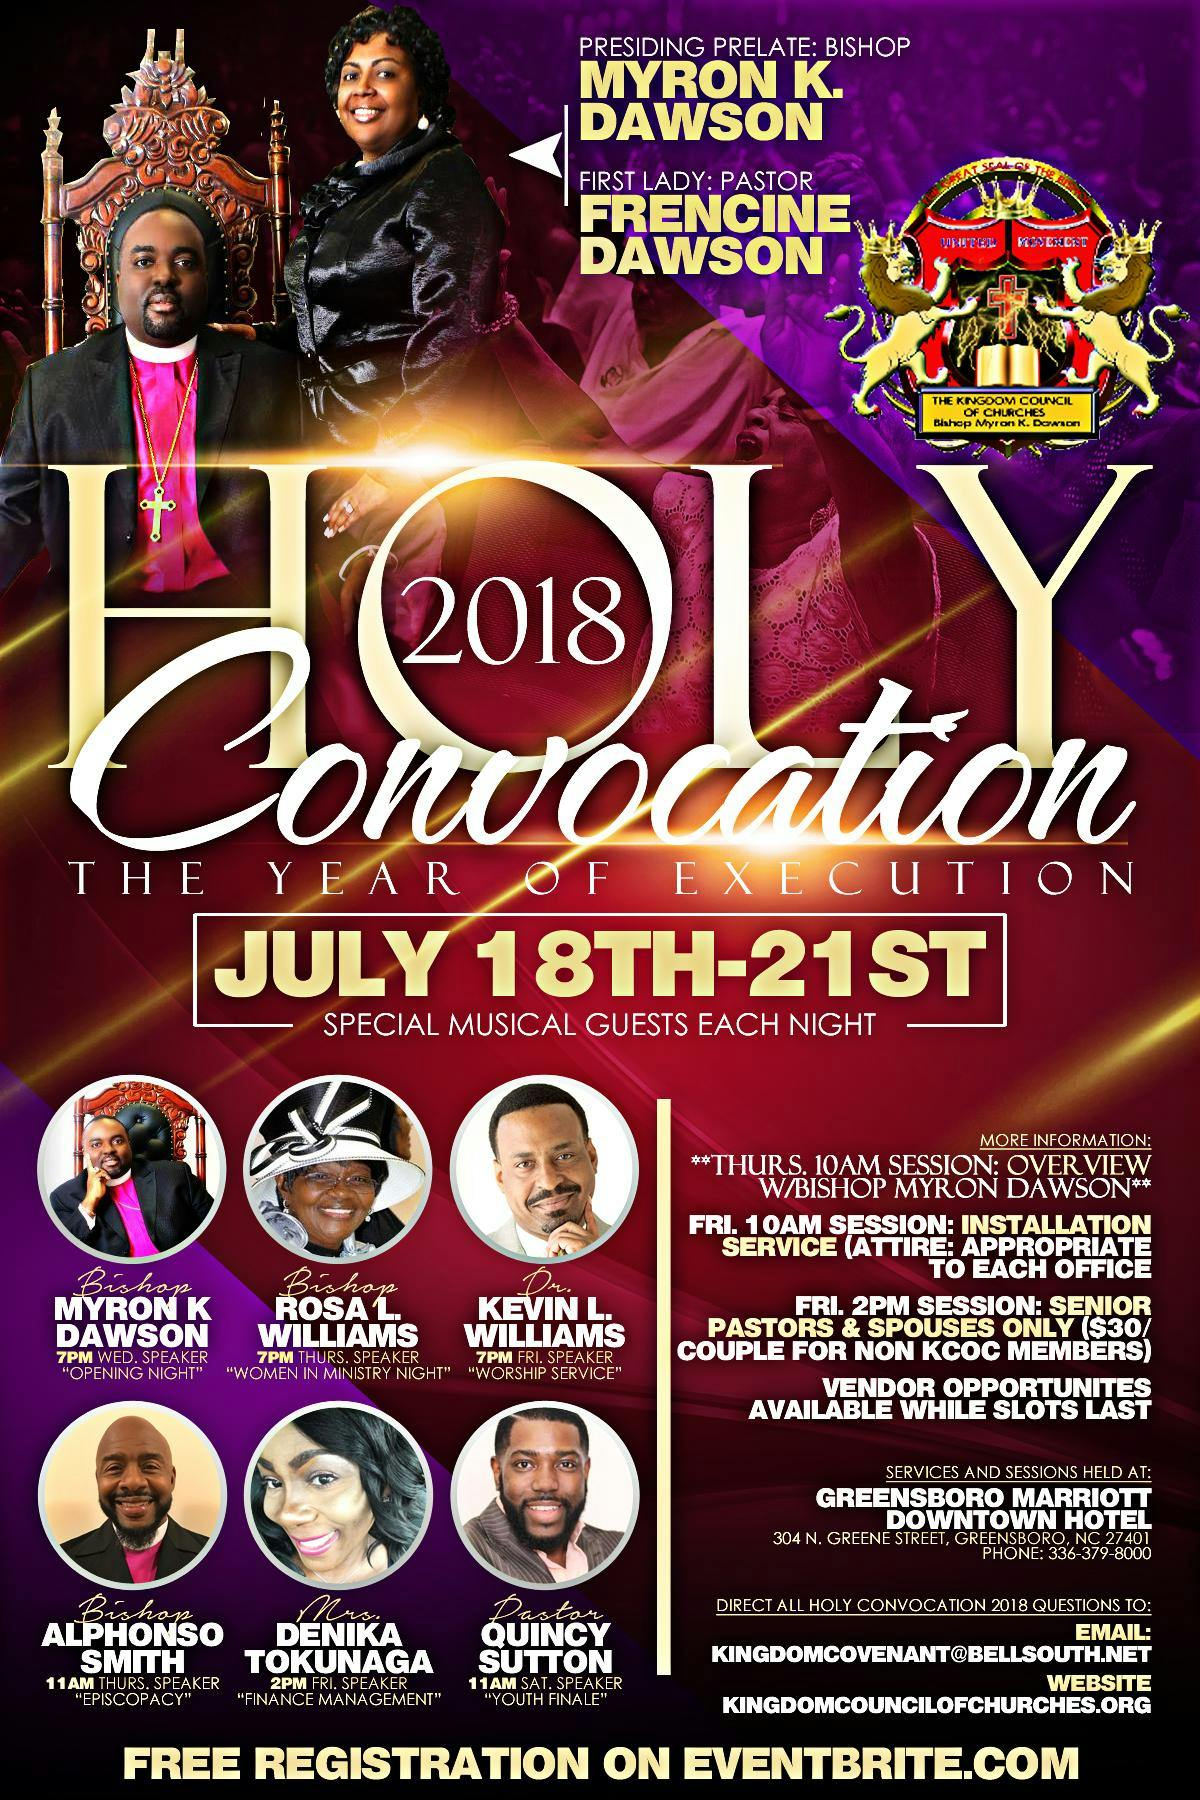 Kingdom Council of Churches (KCOC) HOLY CONVOCATION 2018 